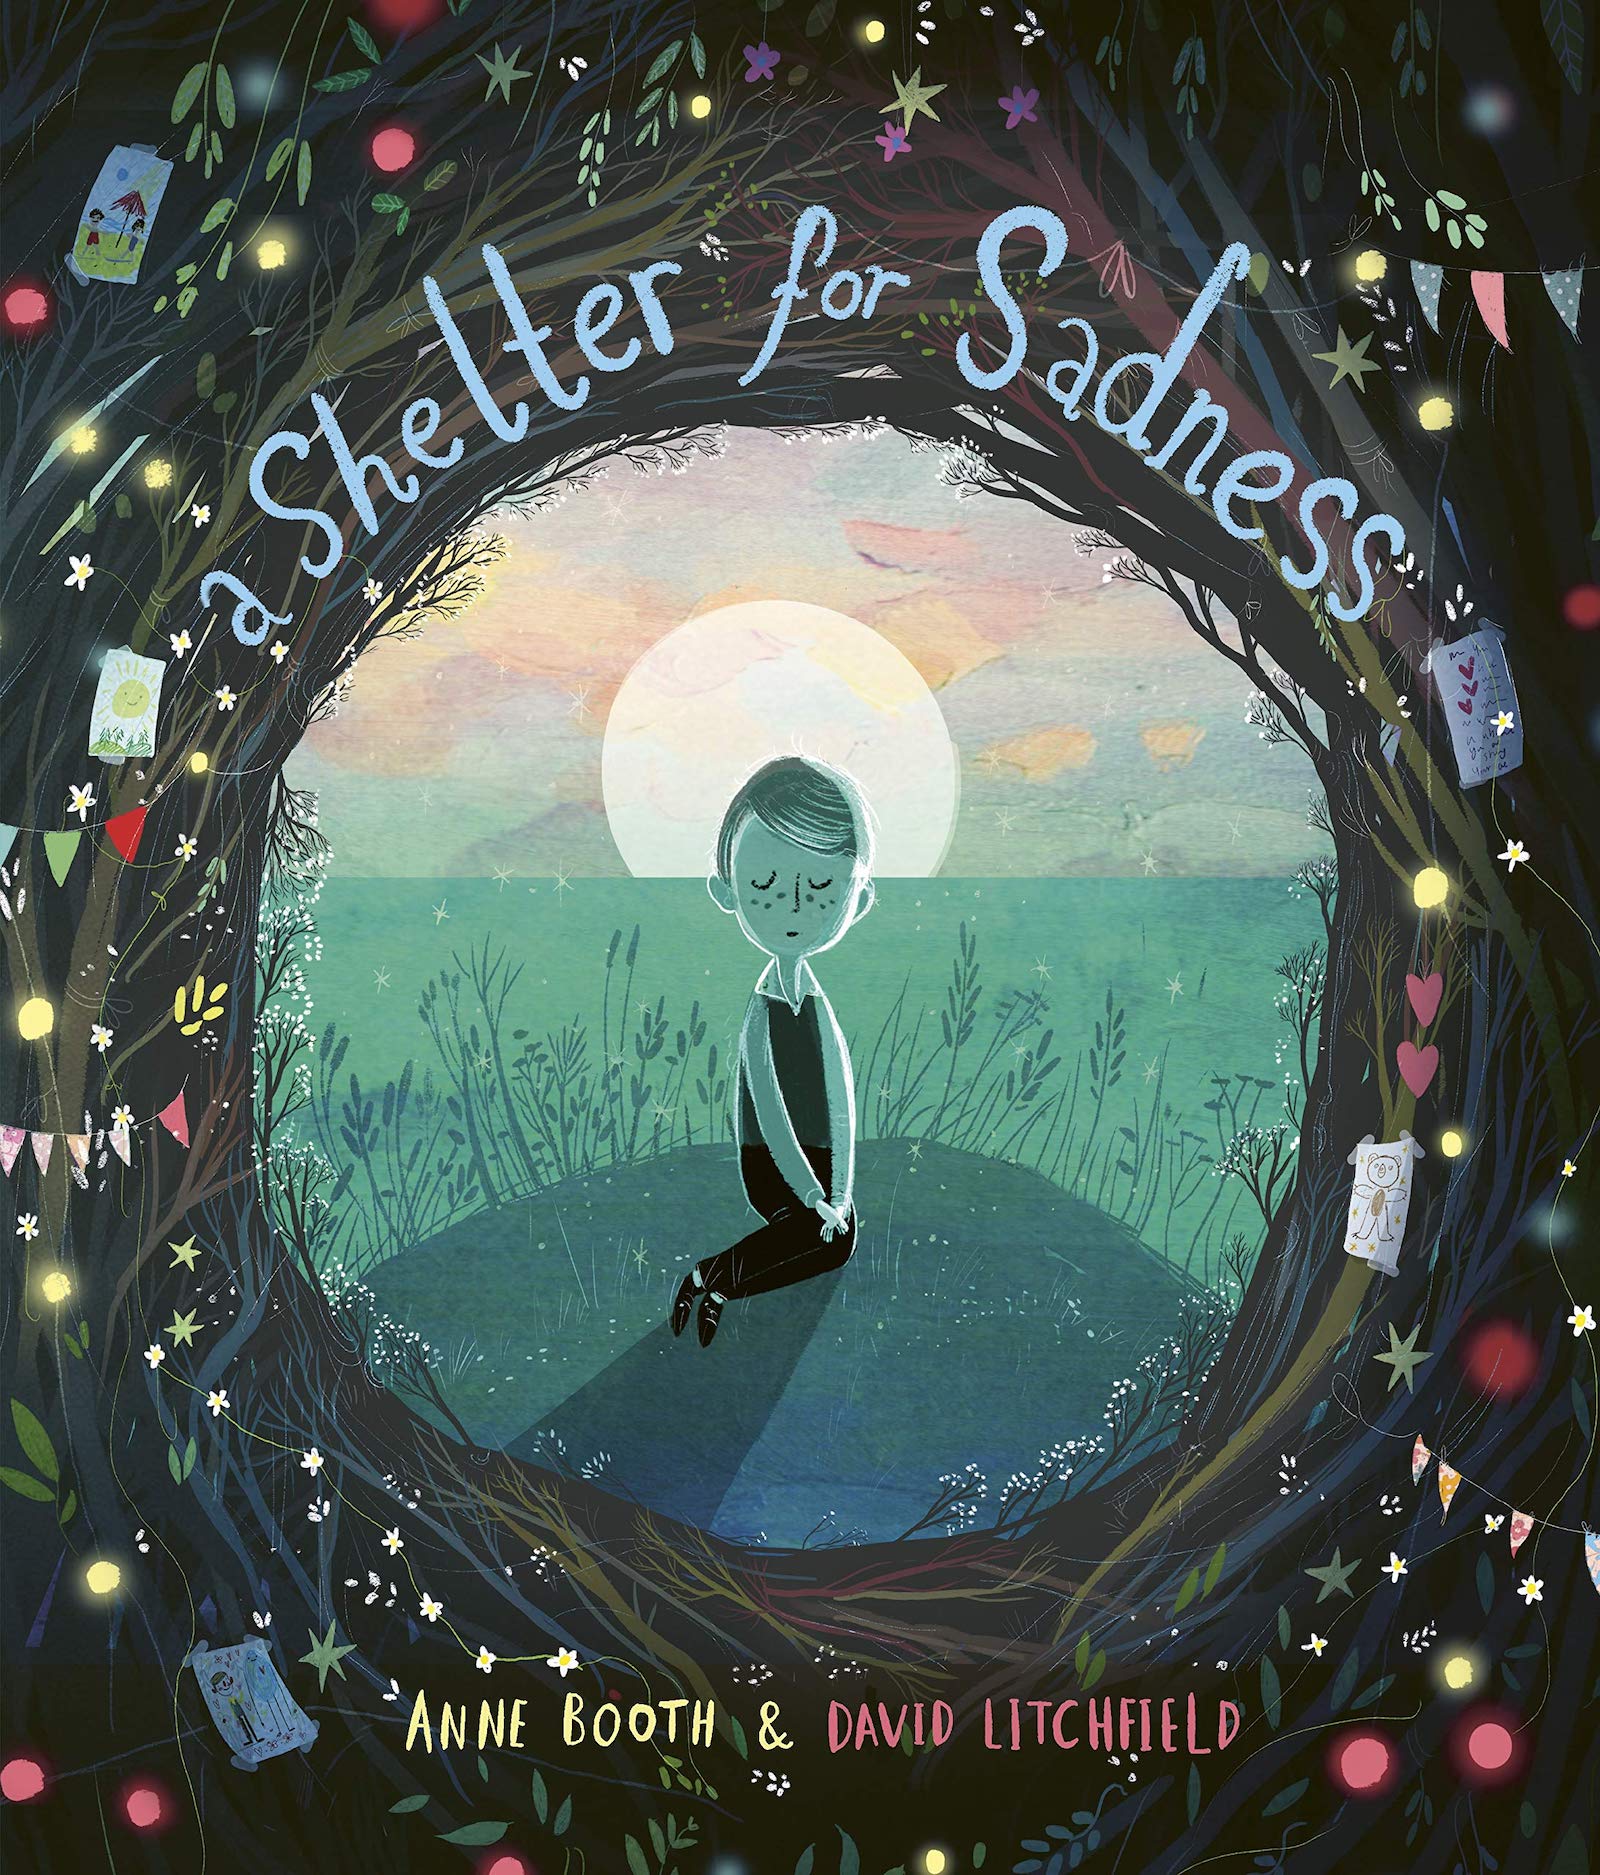 A Shelter for Sadness book cover -- books about sadness